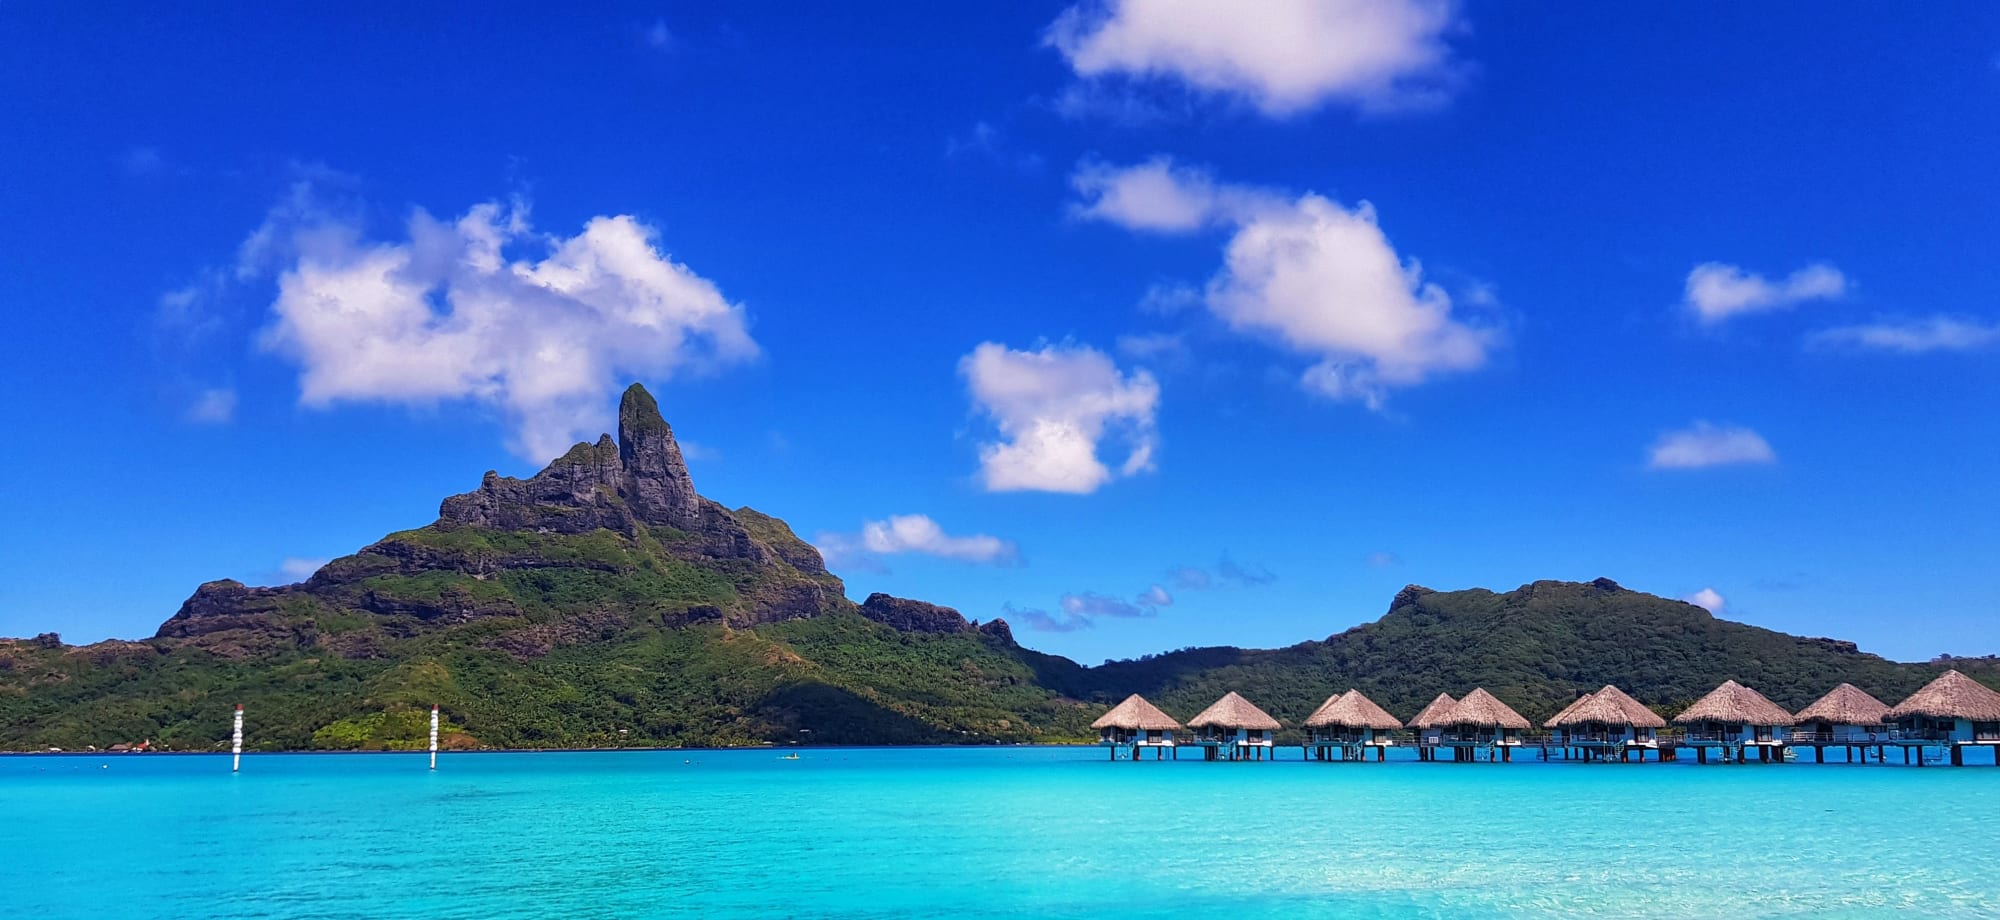 Overwater villas are sitting in the turquoise ocean, backed by massive mountains.